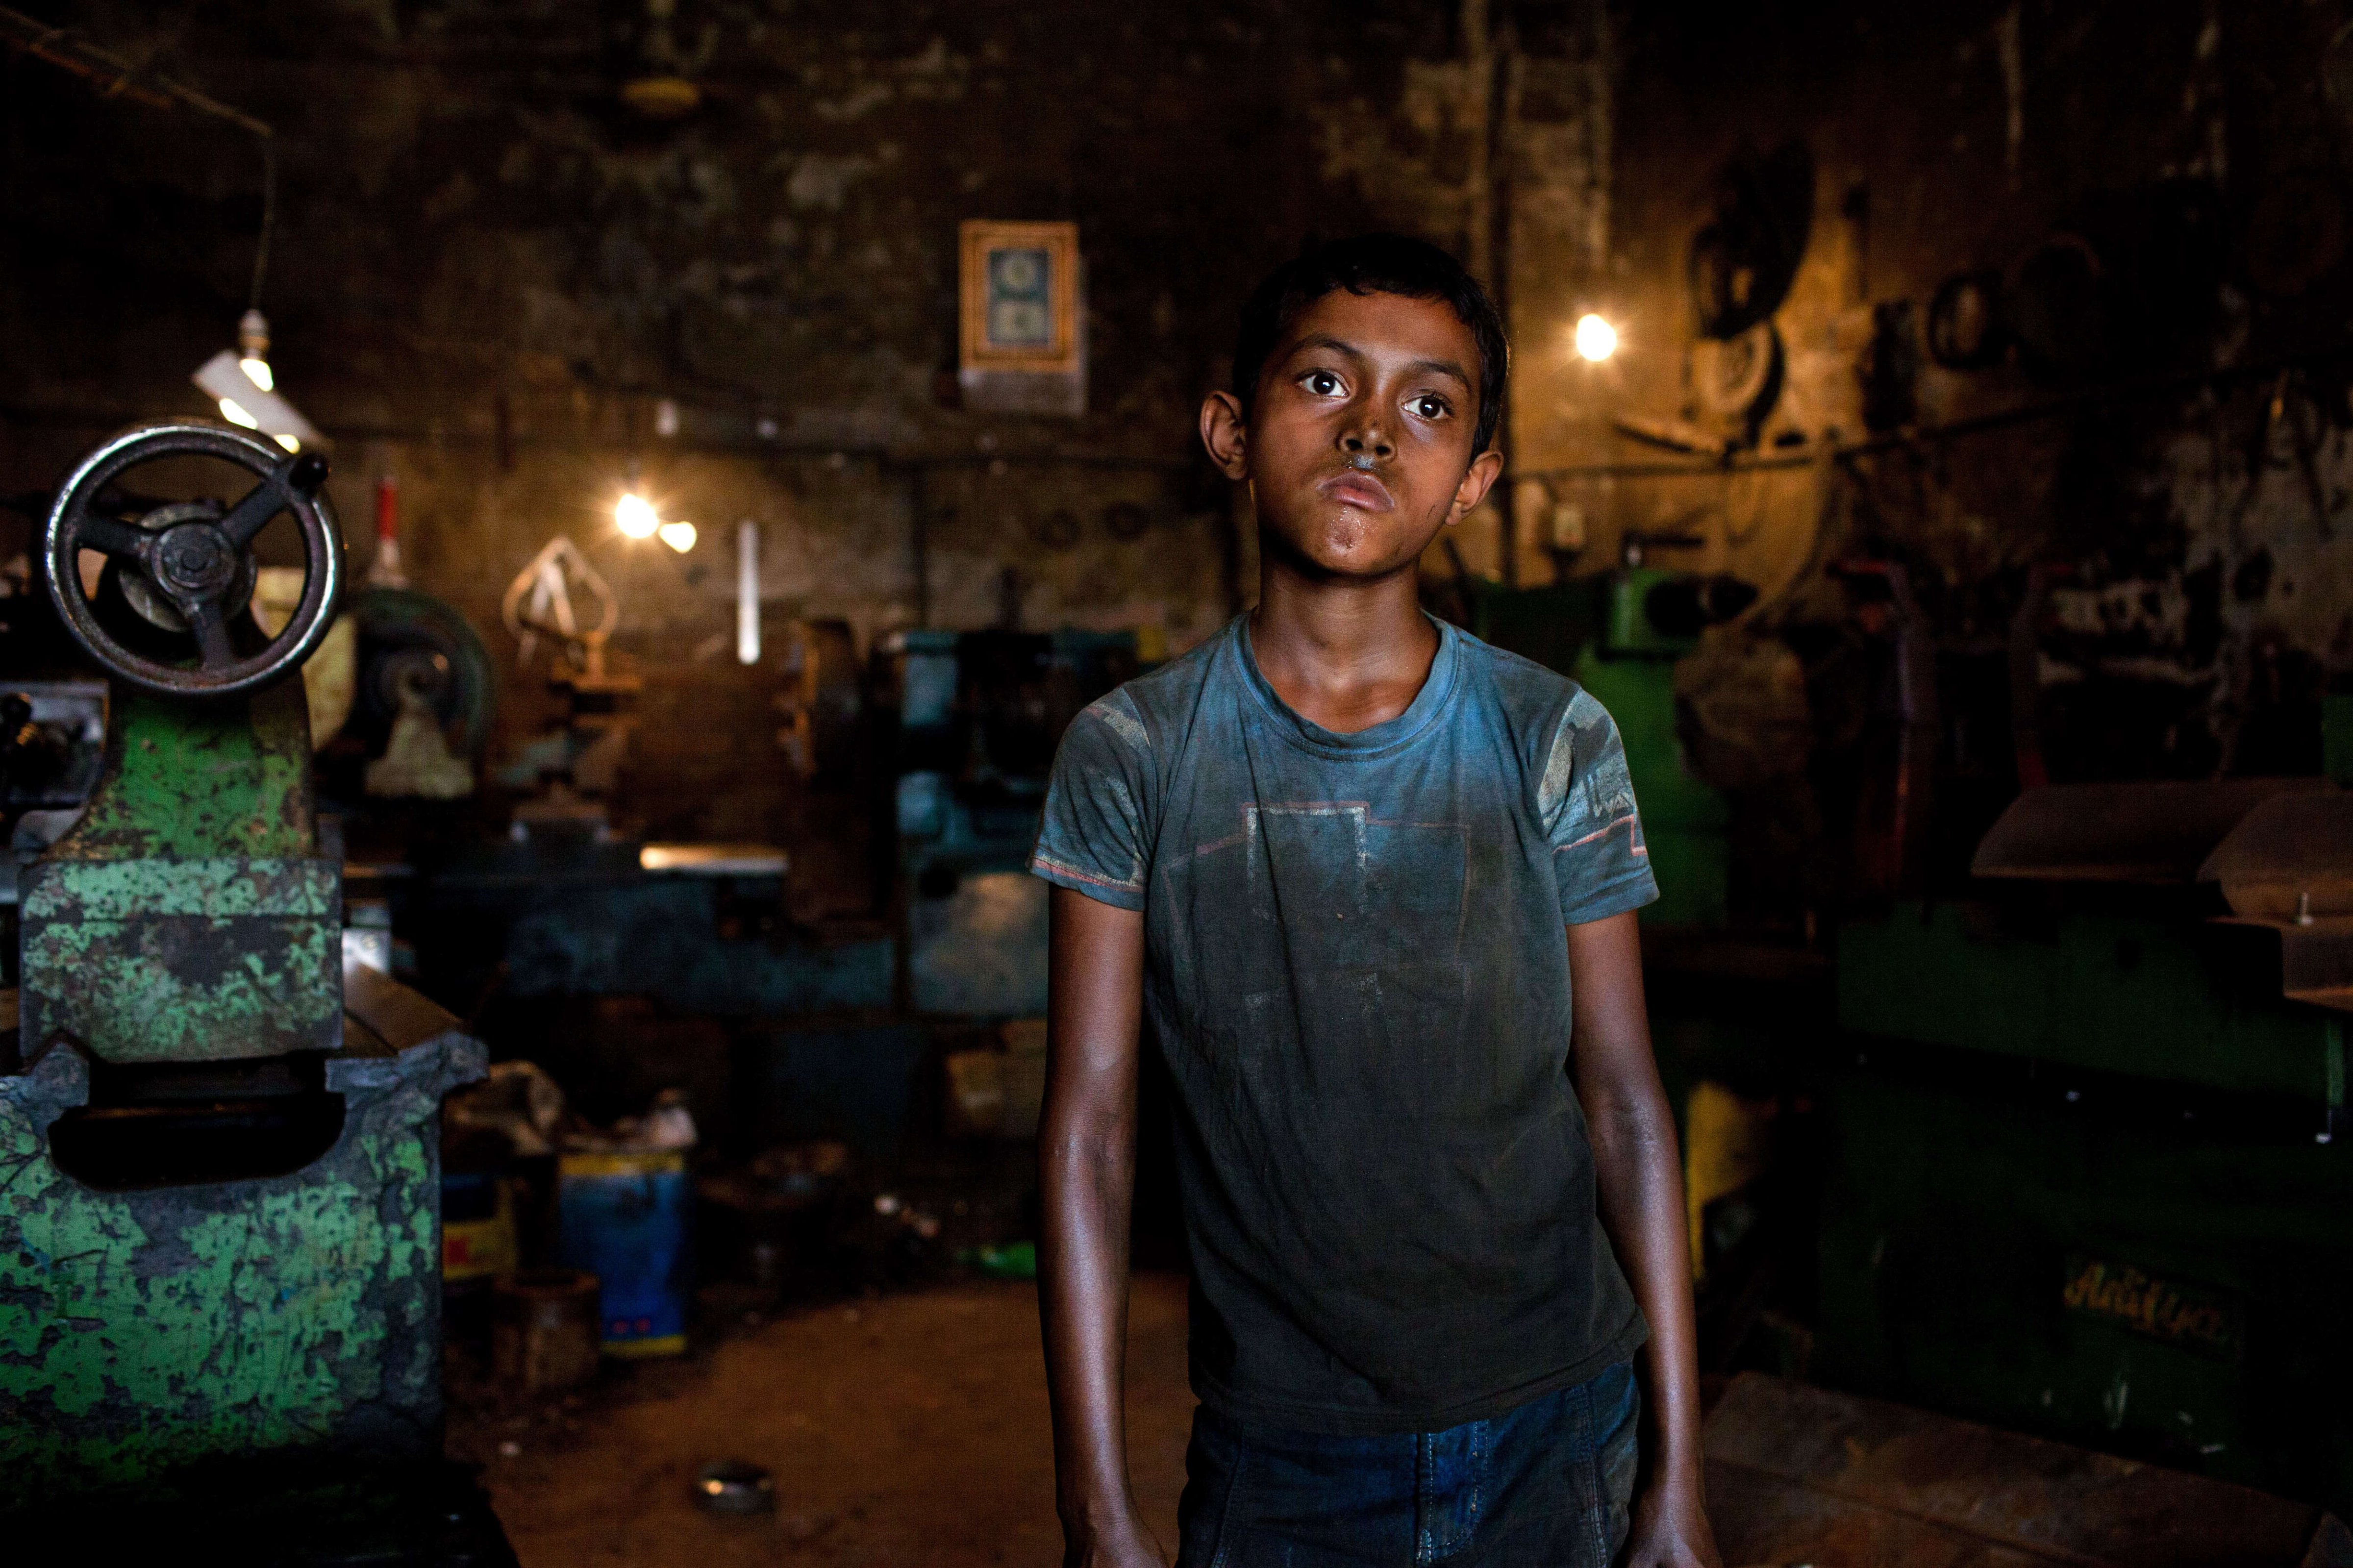 Rakib works in a parts-making shop in Dhaka, Bangladesh, on June 17, 2015. Children in Bangladesh are often employed to do hard manual labor (K M Asad—LightRocket/Getty Images)